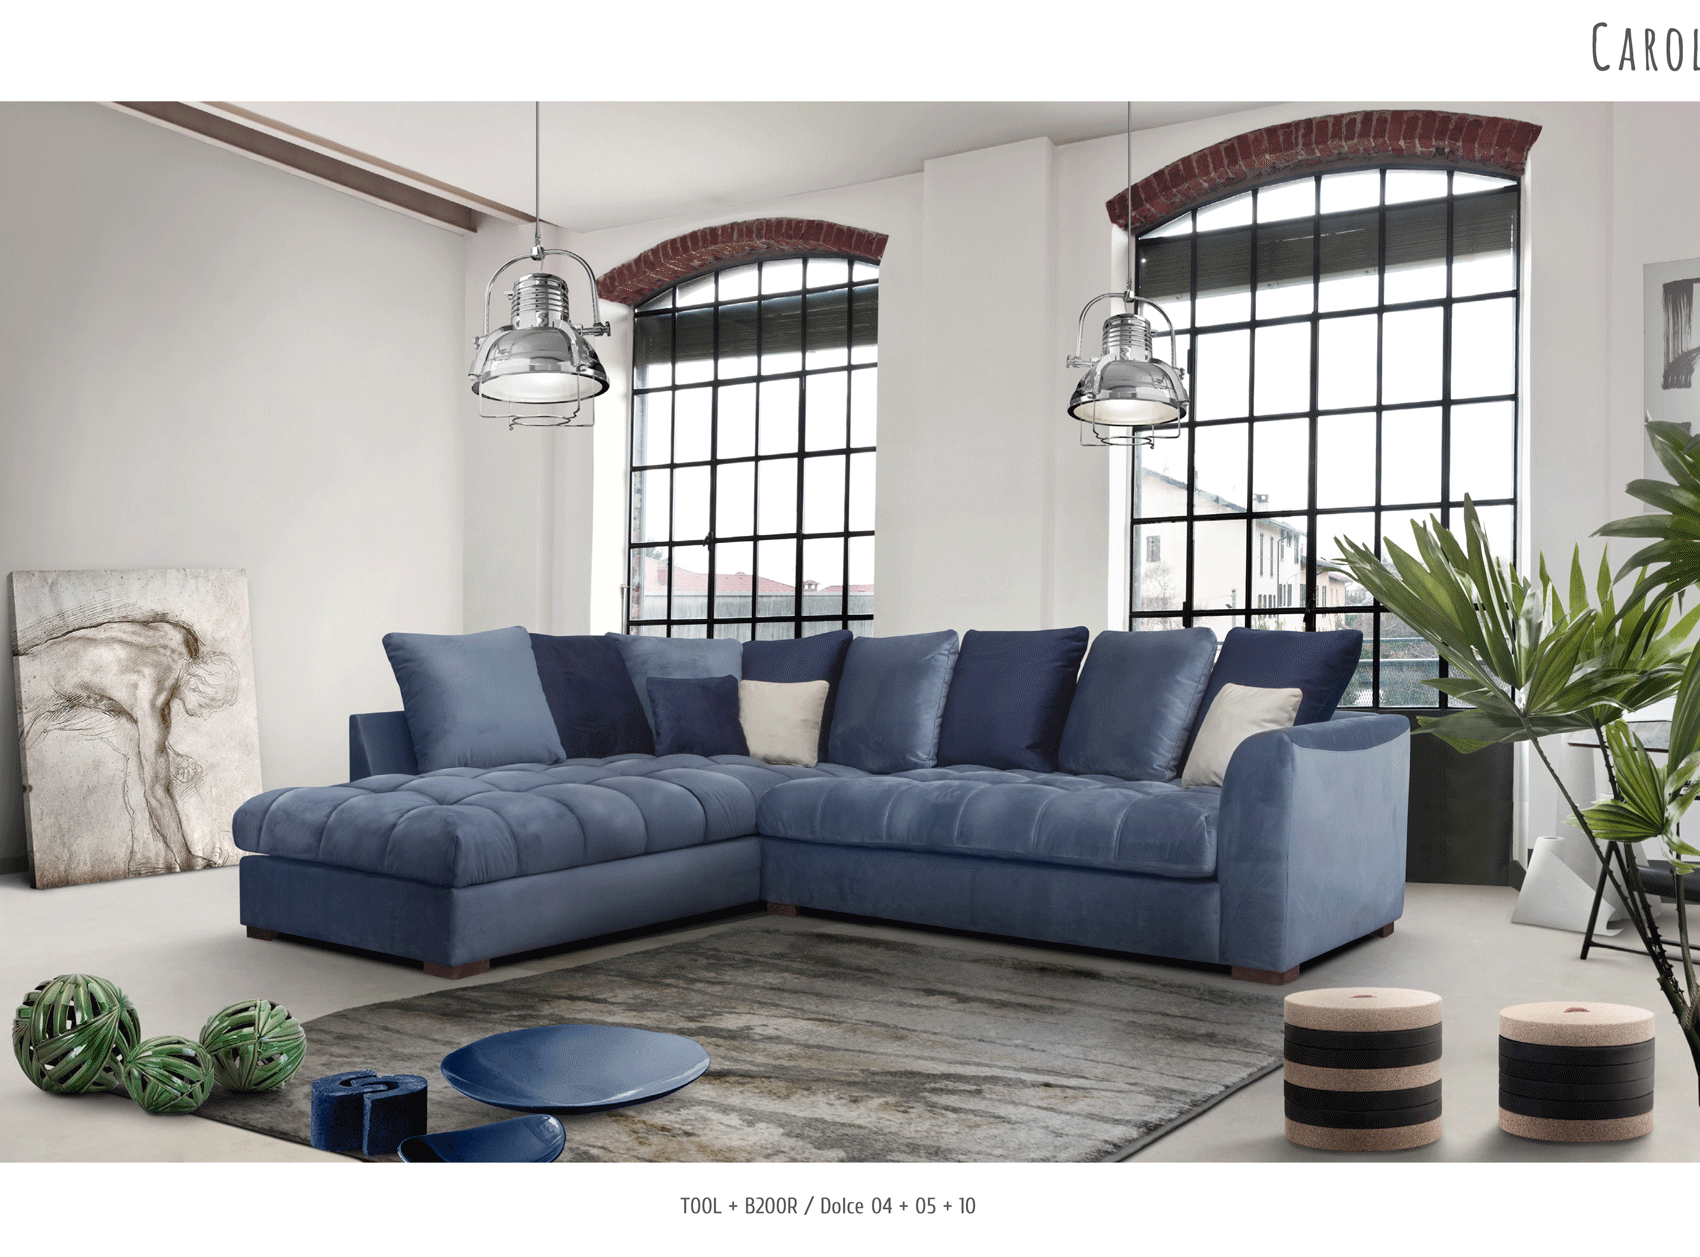 Brands European Living Collection Carol Sectional